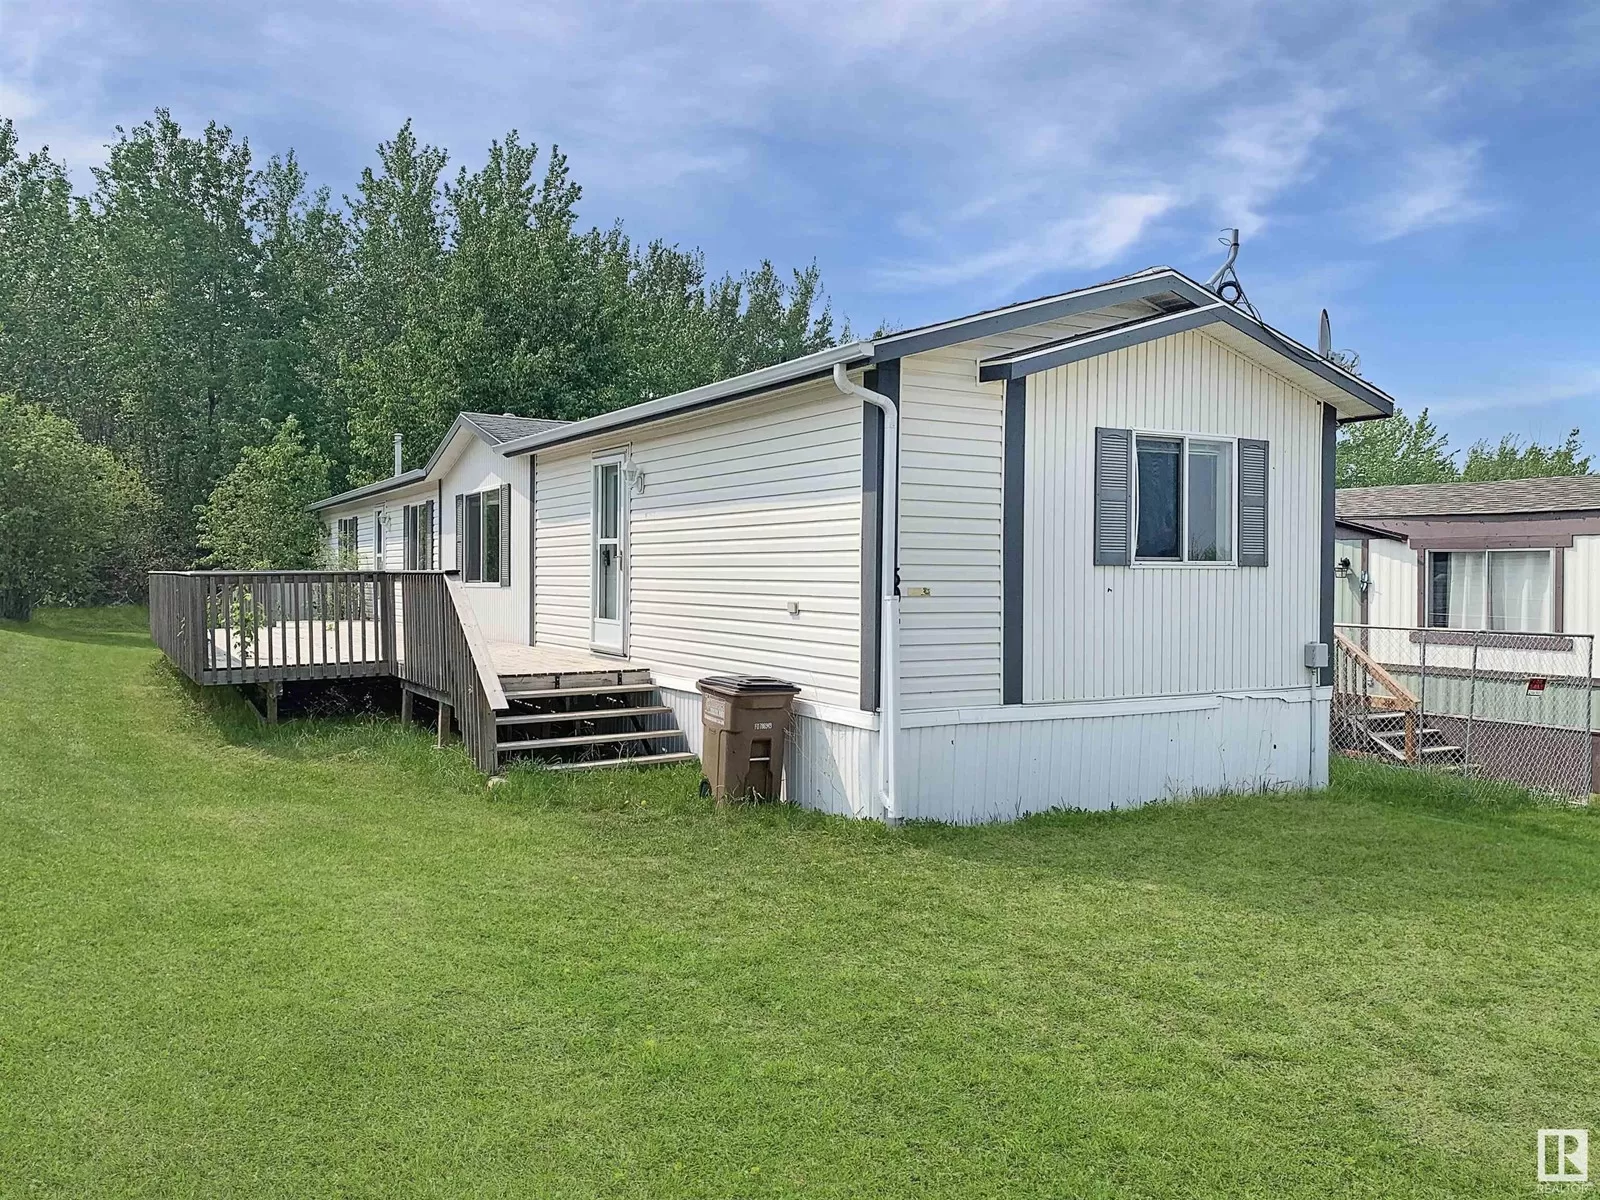 Manufactured Home for rent: 5925 Willow Dr, Boyle, Alberta T0A 0M0